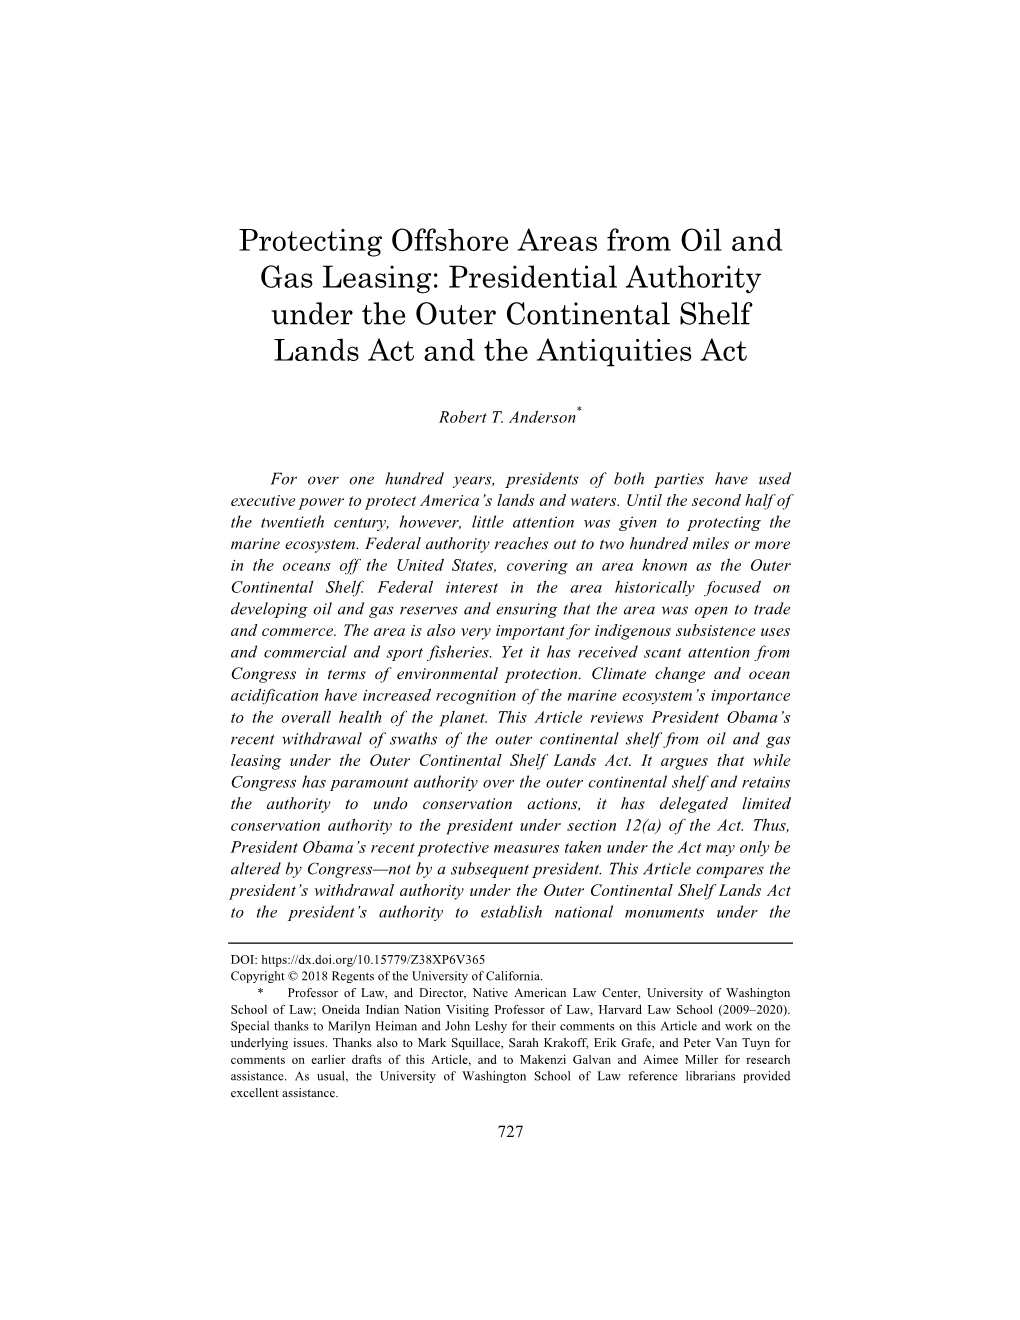 Protecting Offshore Areas from Oil and Gas Leasing: Presidential Authority Under the Outer Continental Shelf Lands Act and the Antiquities Act